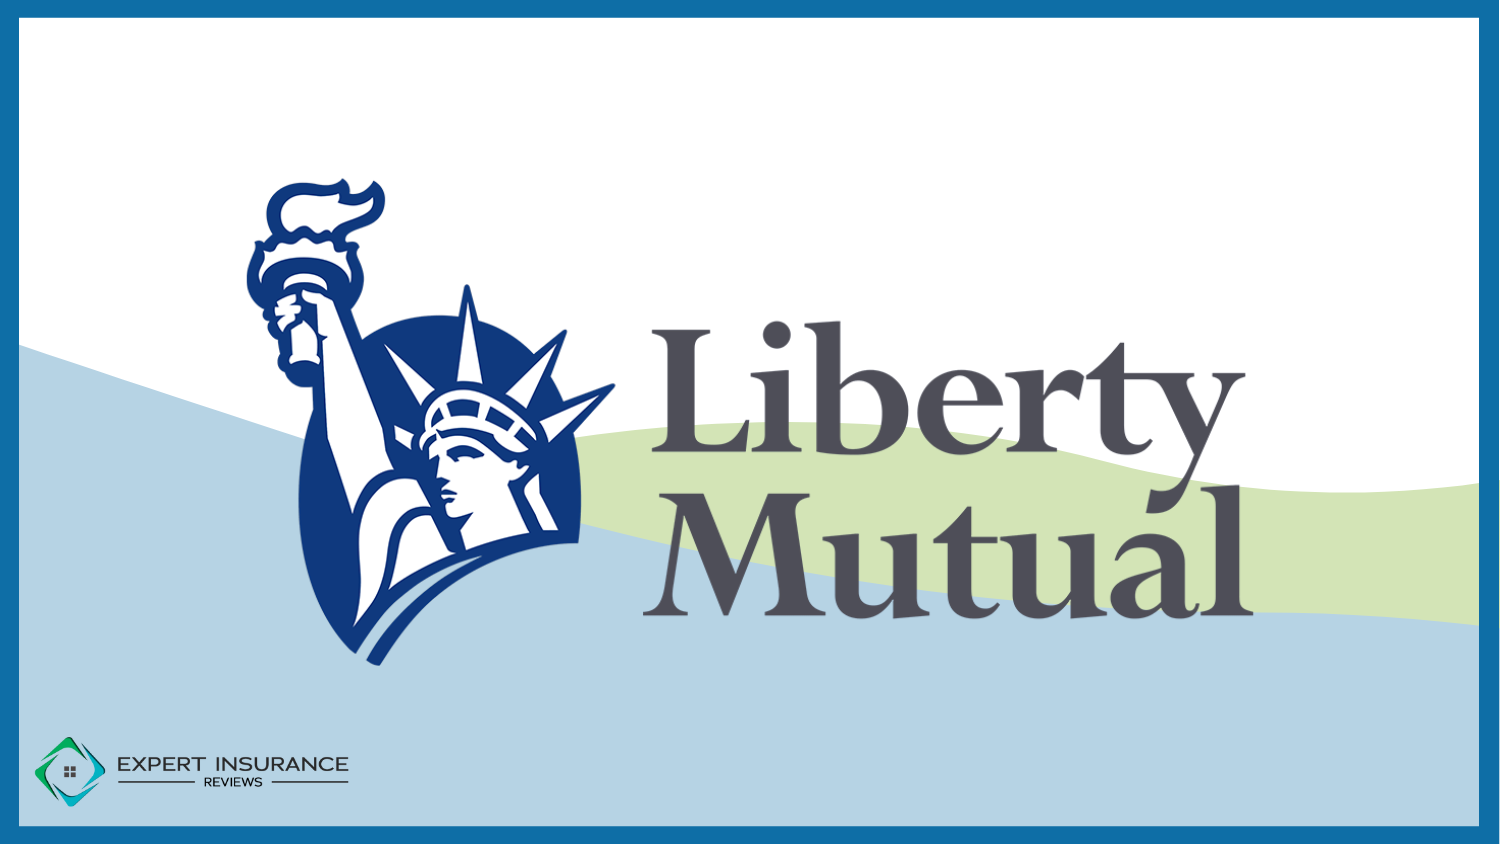 Best Acupuncturists That Accept Medicare: Liberty Mutual